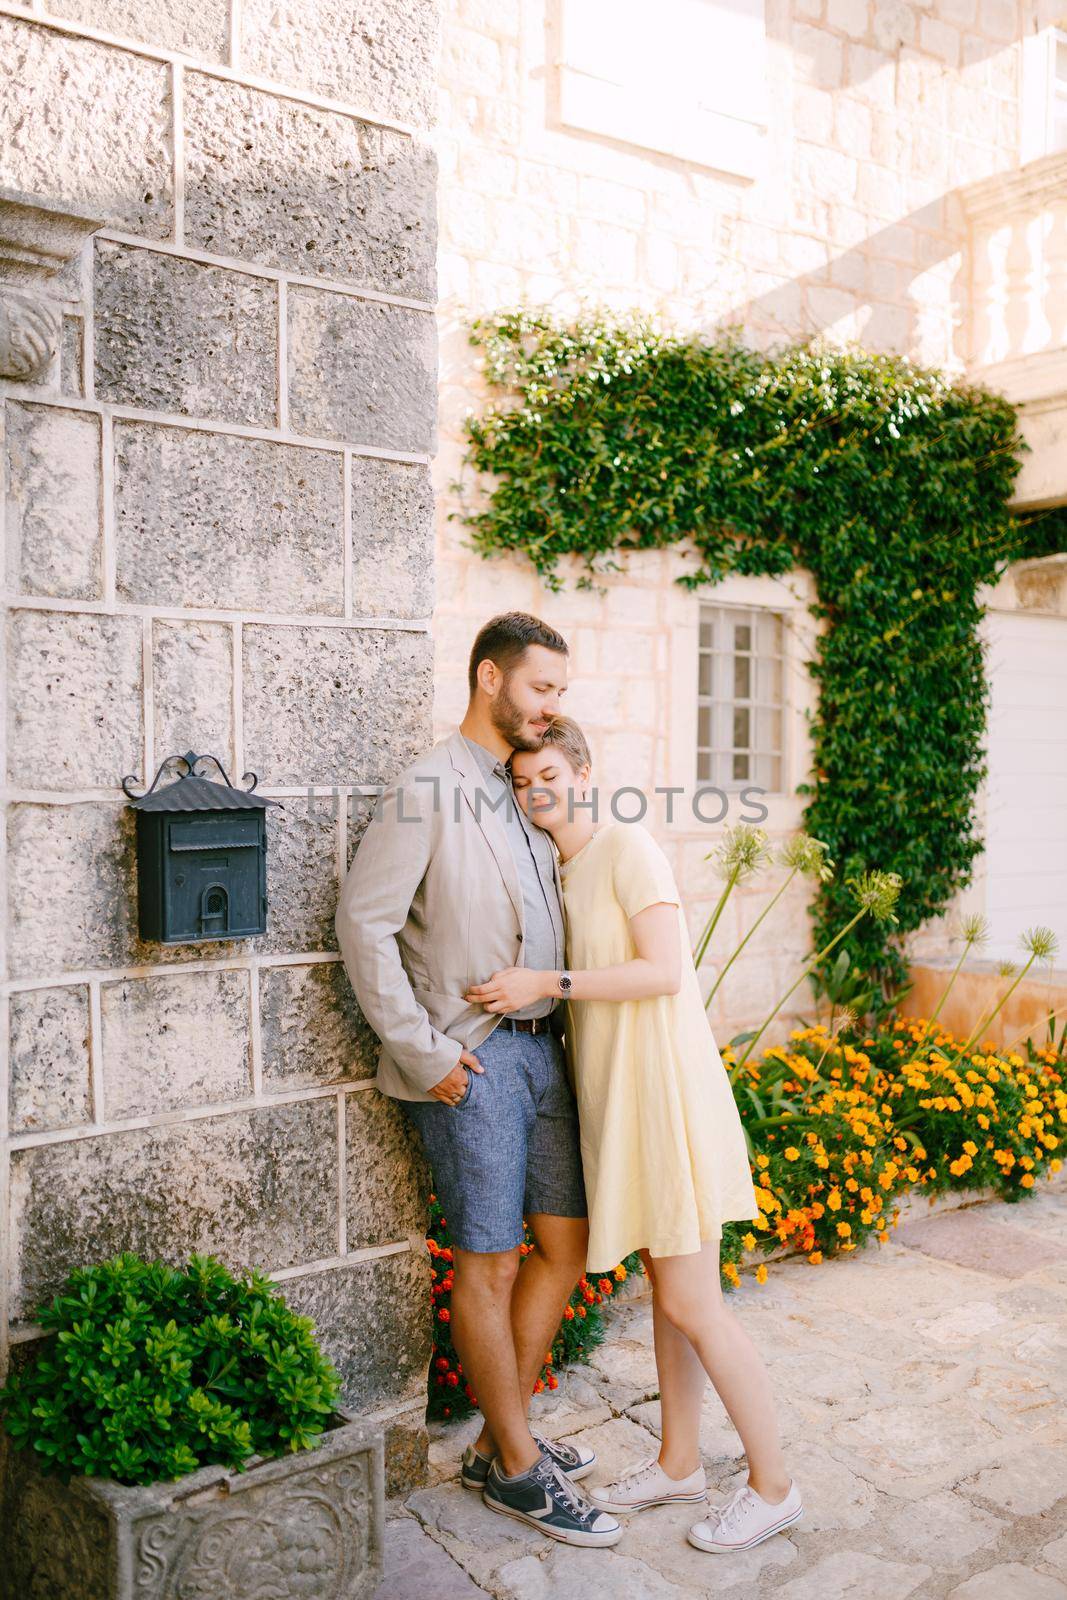 A man and a woman are embracing at the wall of a beautiful house with a window, a liana, flowers and a mailbox by Nadtochiy